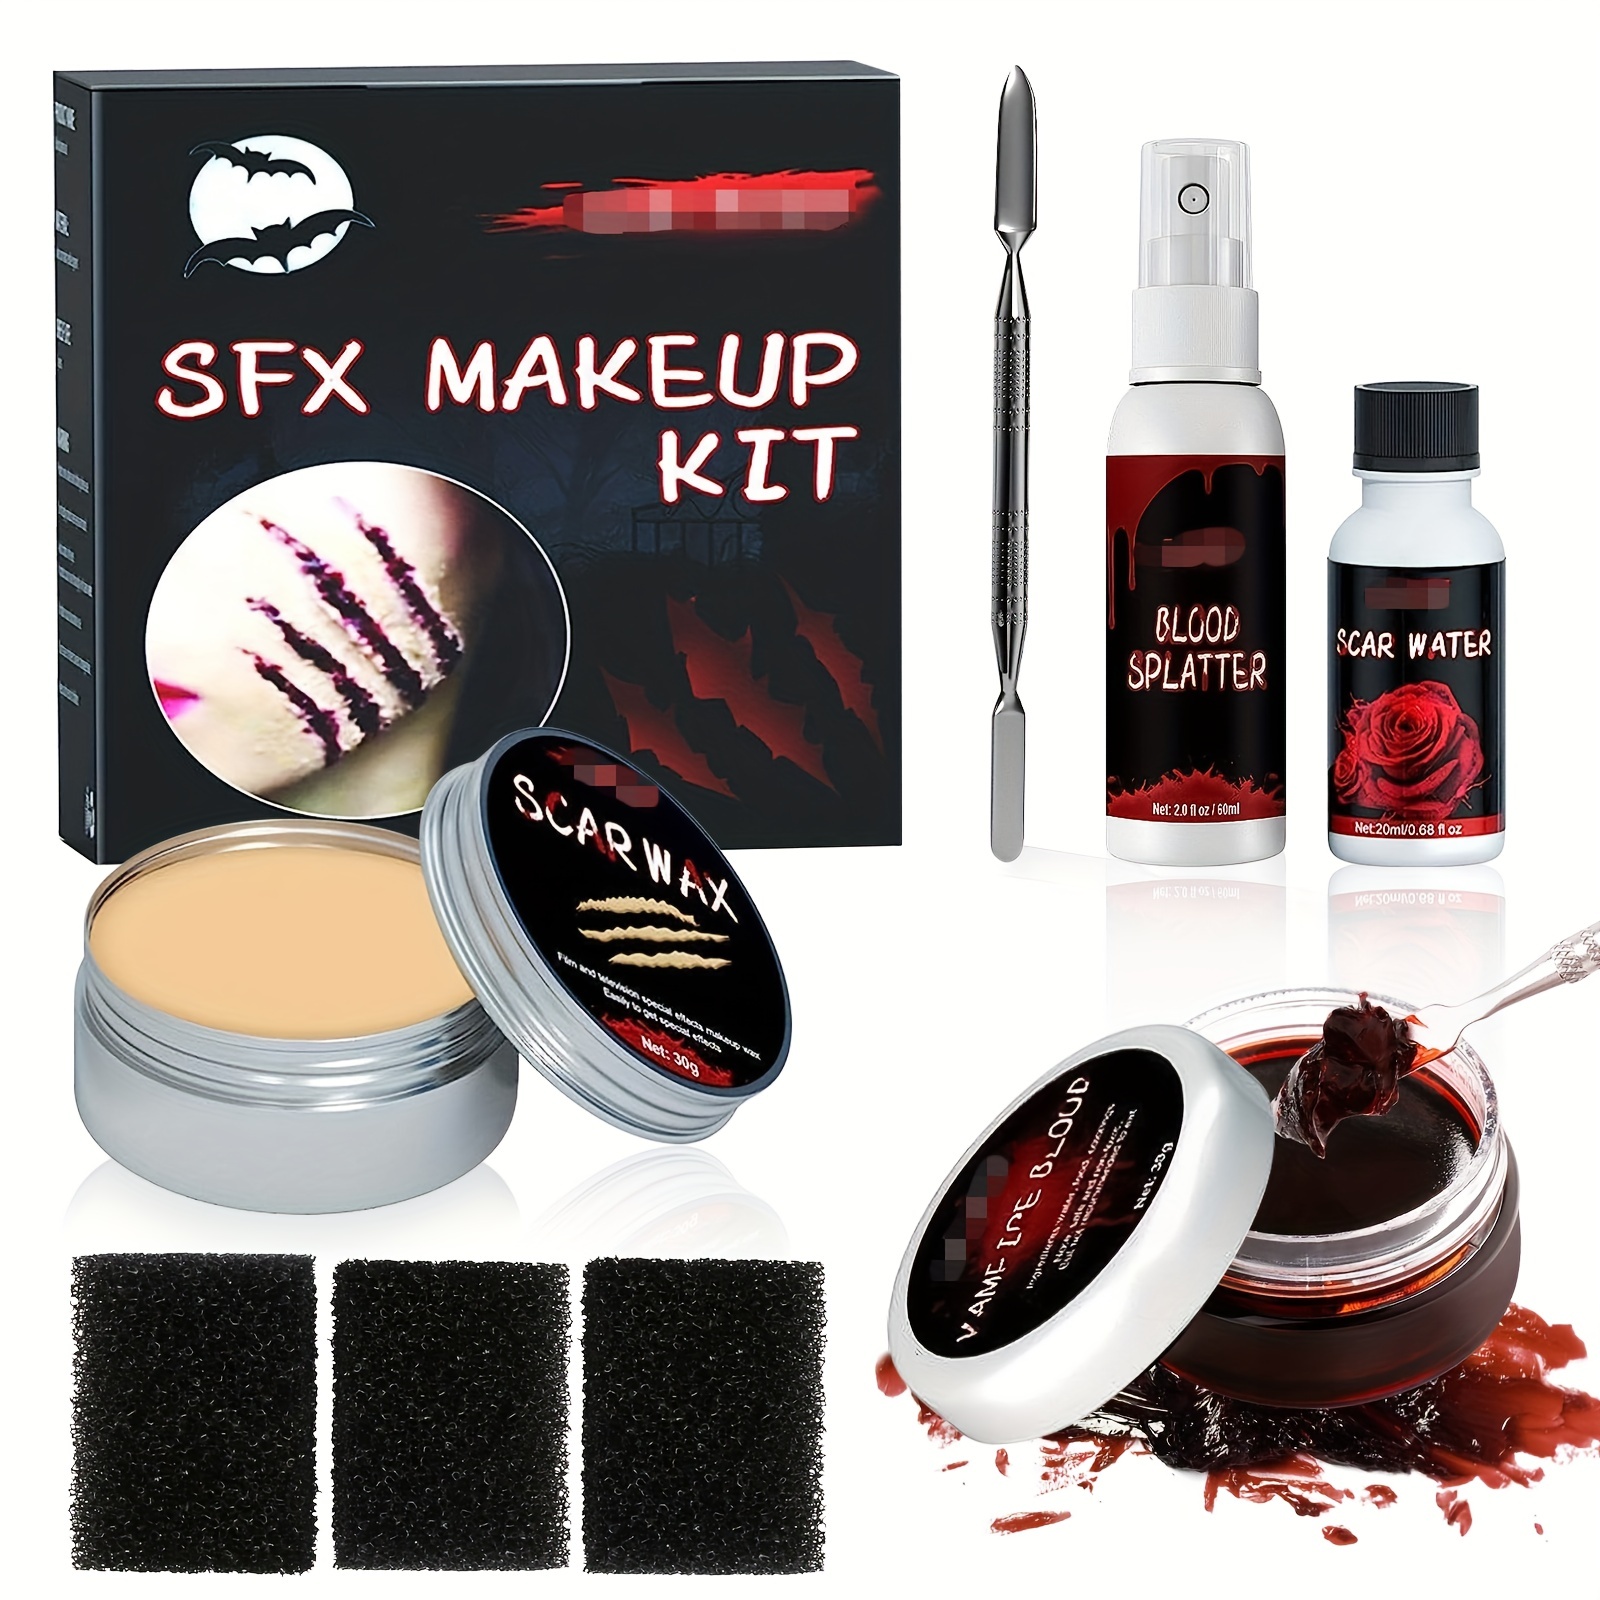  Halloween Makeup Kit Scars Wax, Halloween Fake Blood Makeup Kit  ,Scary Face Makeup Fake Wound Scar Wax Stage Fake Wound Professional Makeup  Palettes for Art, Theater, Halloween, Parties and Cosplay 